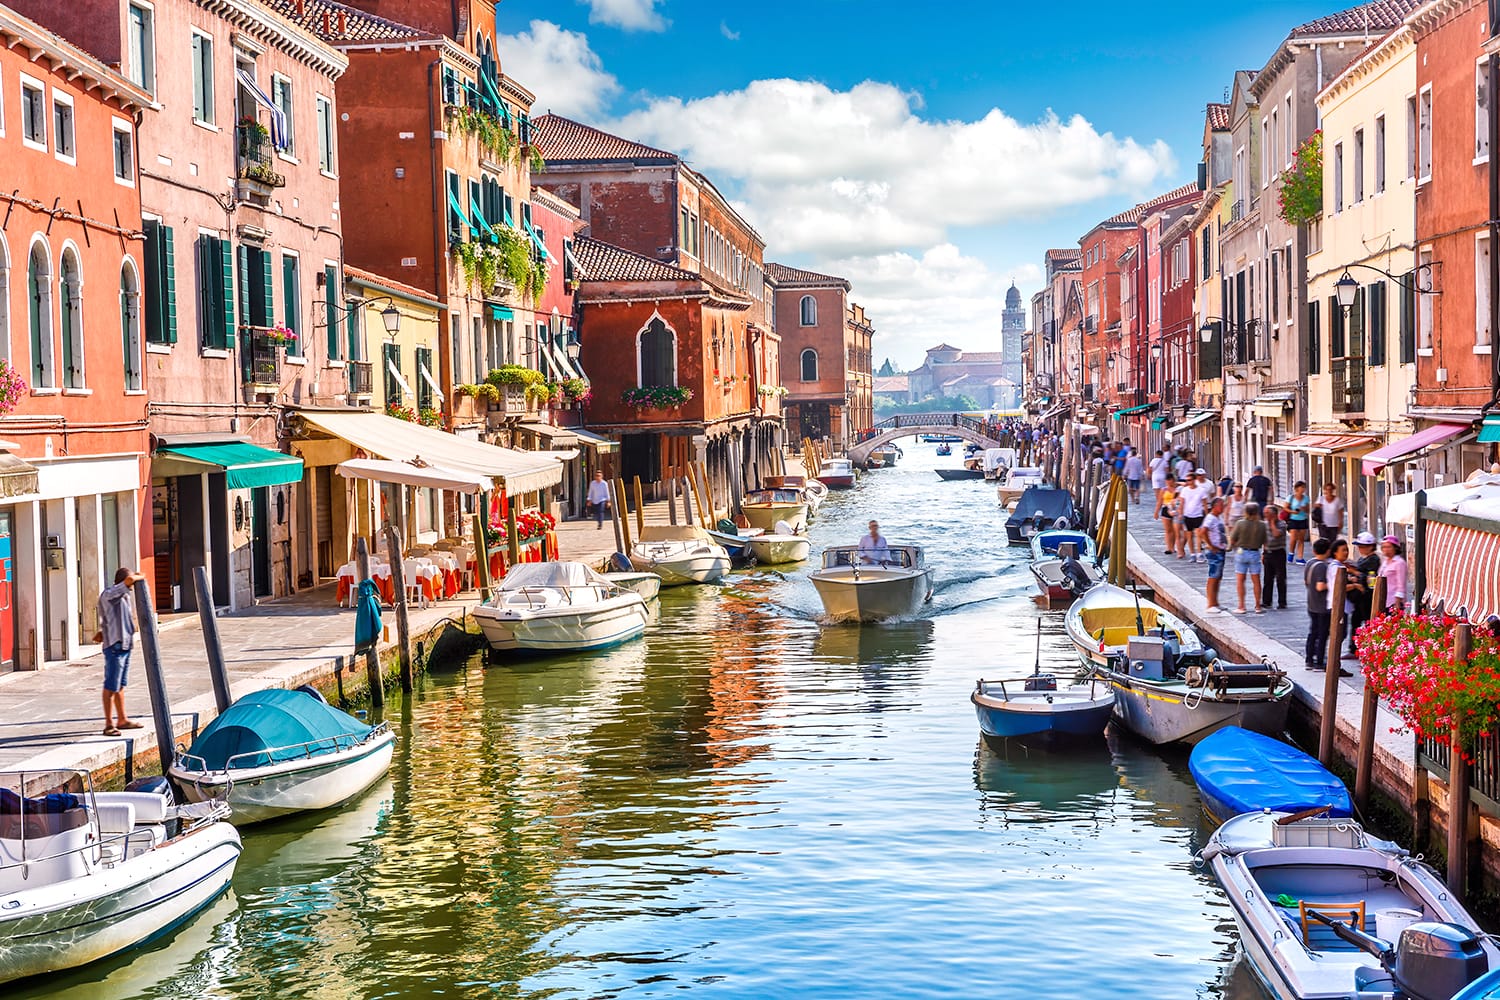 Island murano in Venice Italy. View on canal with boat and motorboat water.